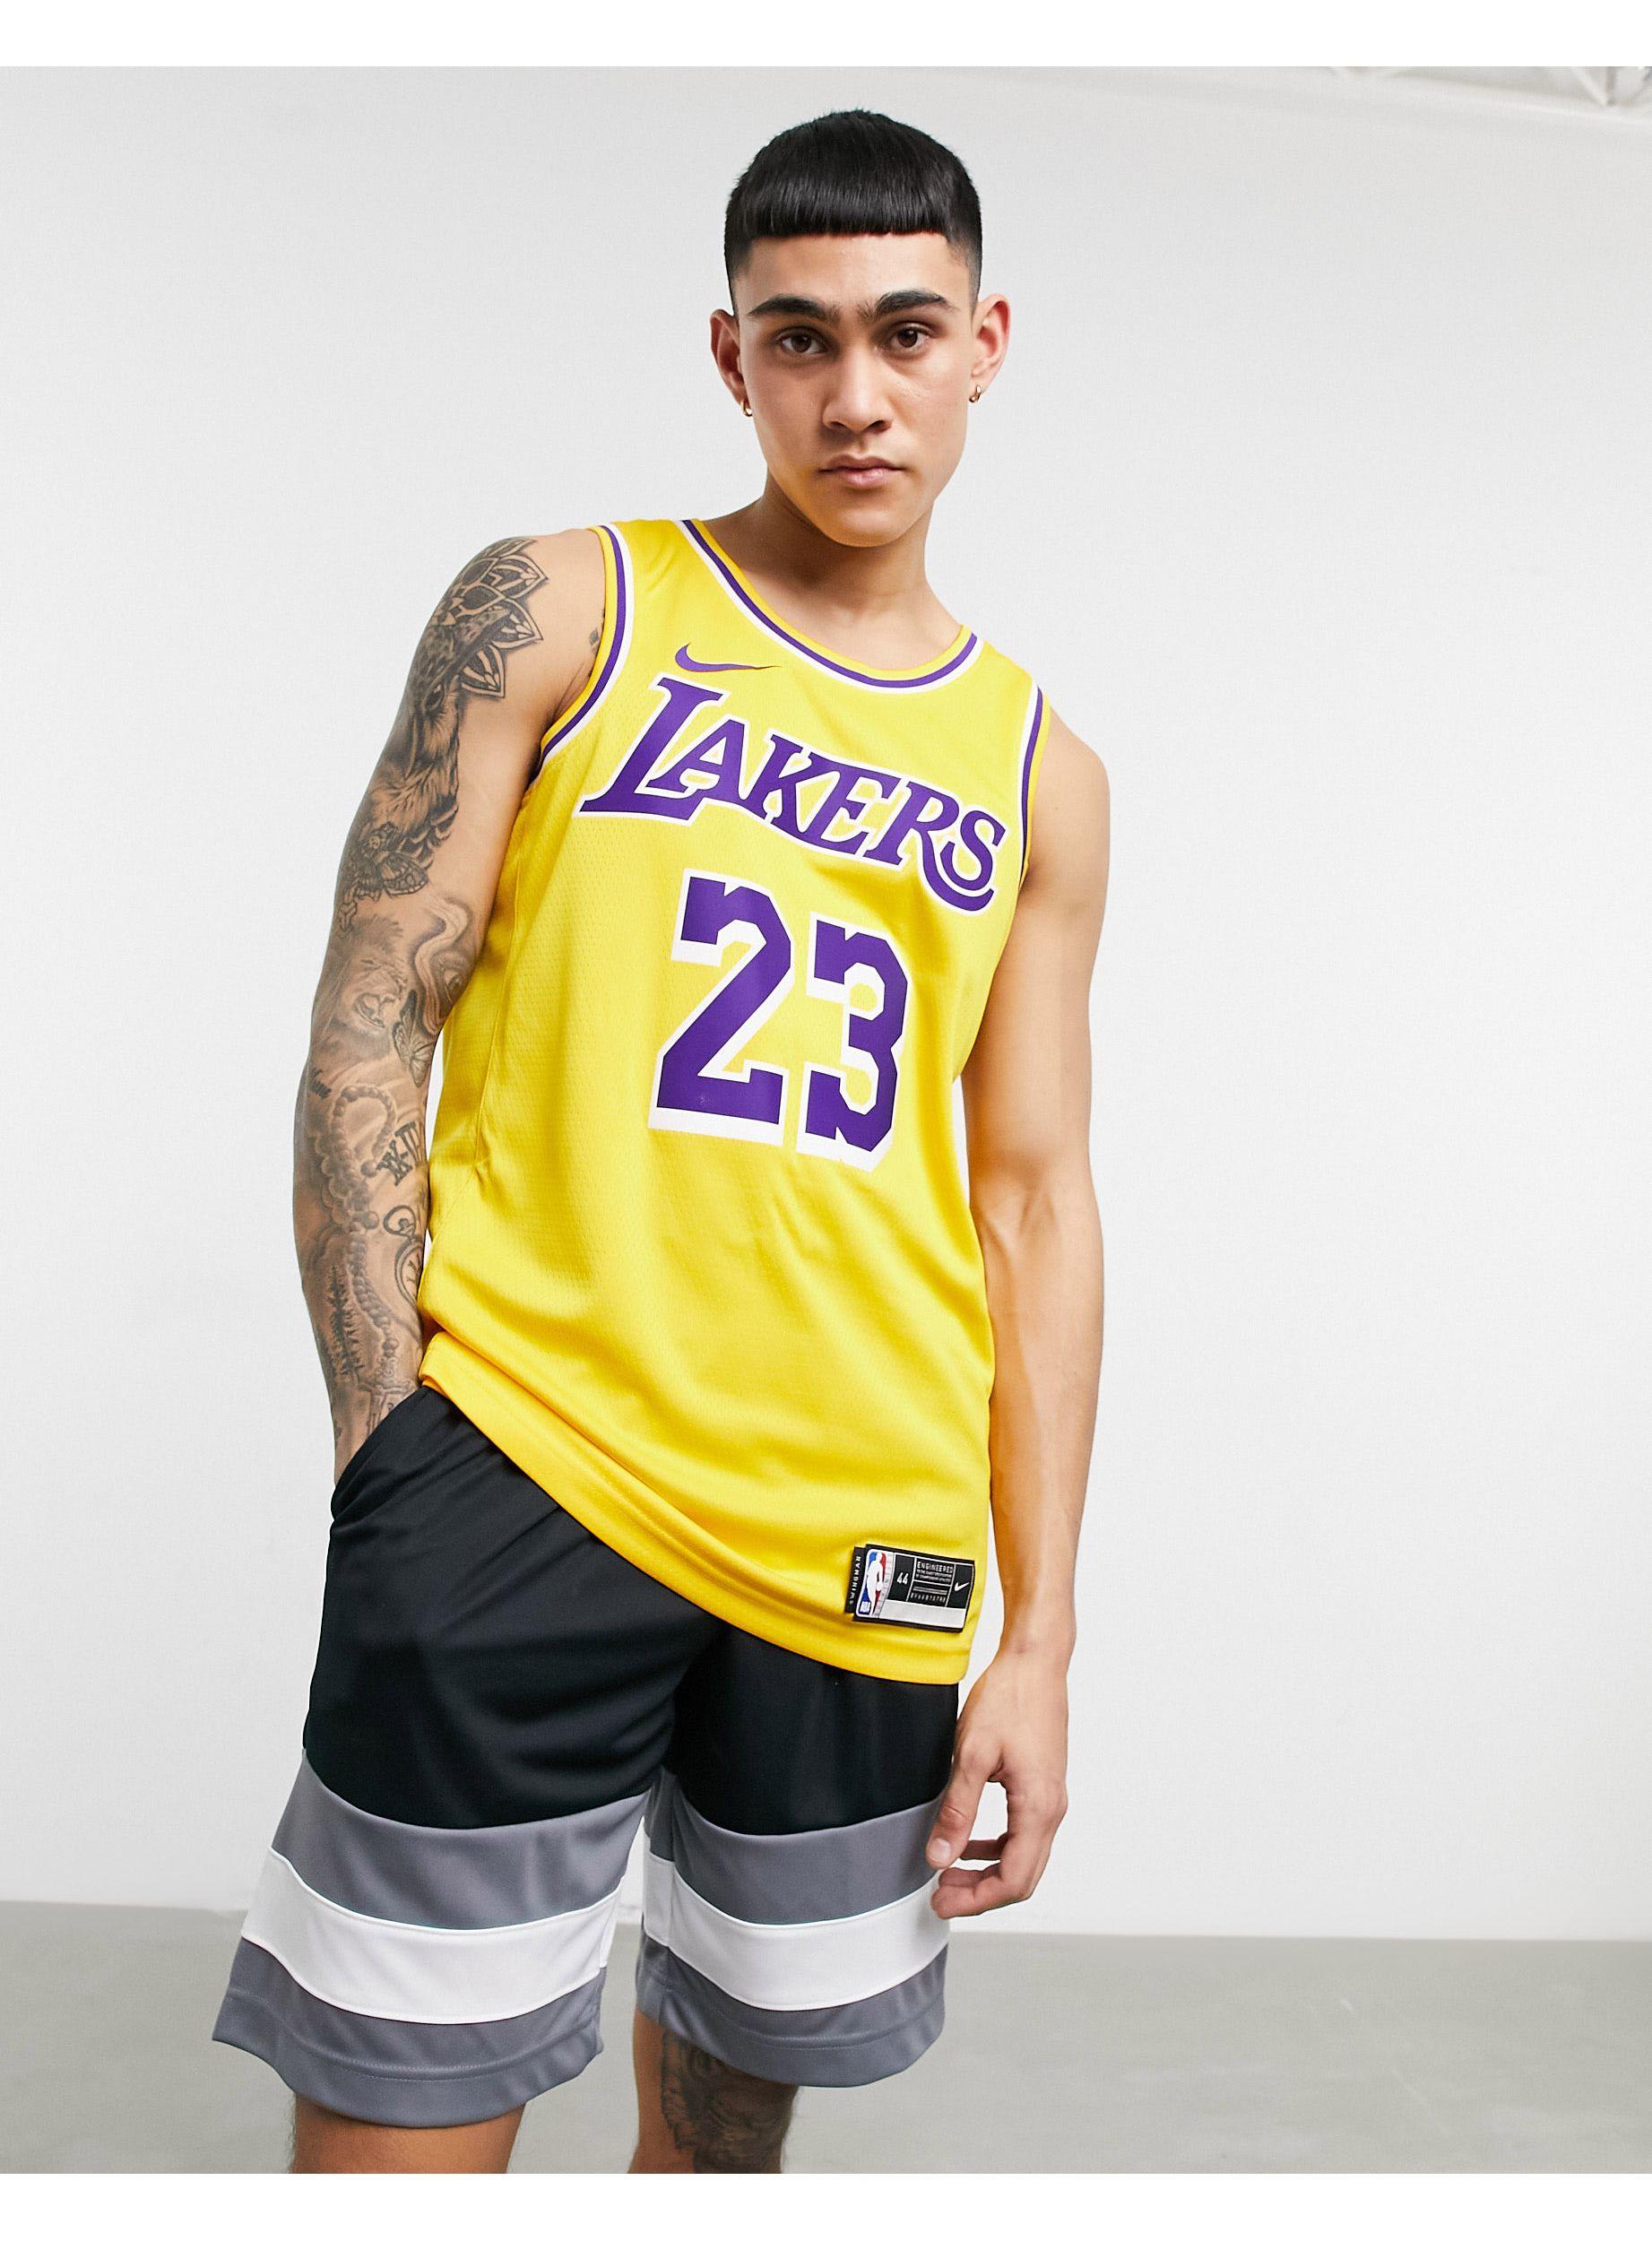 Mitchell Ness NBA Sublimated Player Débardeur Los Angeles Lakers Shaquille  O'Neal Mode | freixenet.com